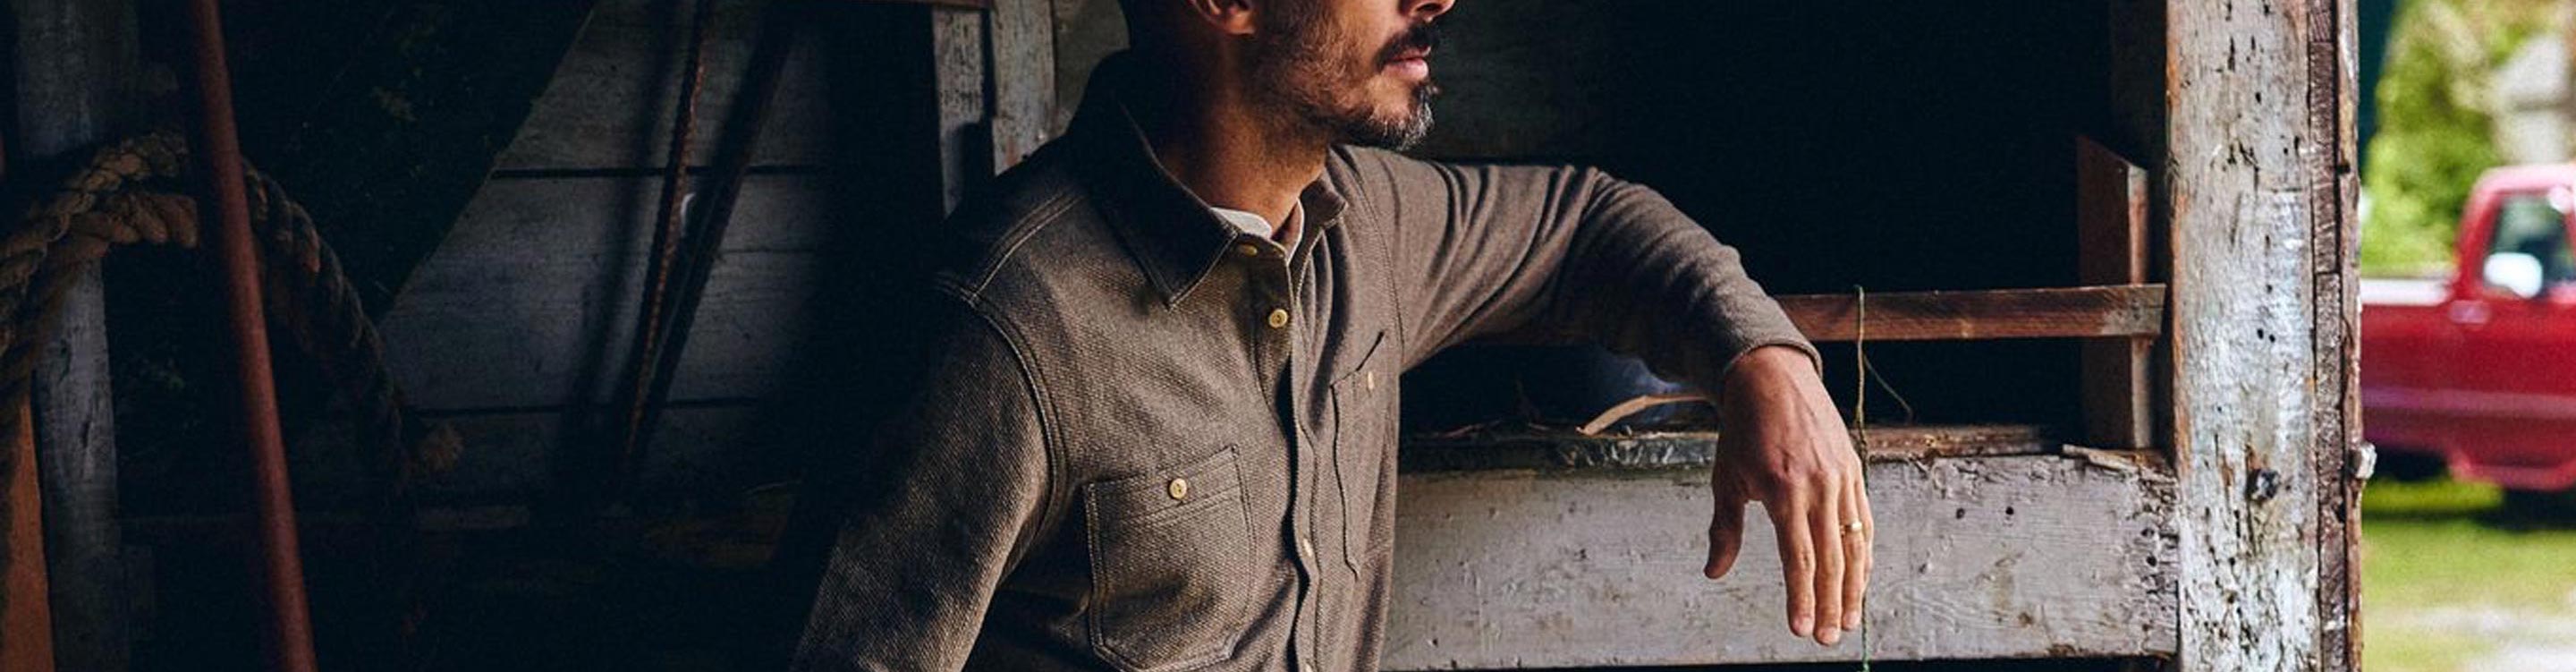 Knit Shirt Men Utility Stitch Shirts Knit The Twill in Taylor for - |